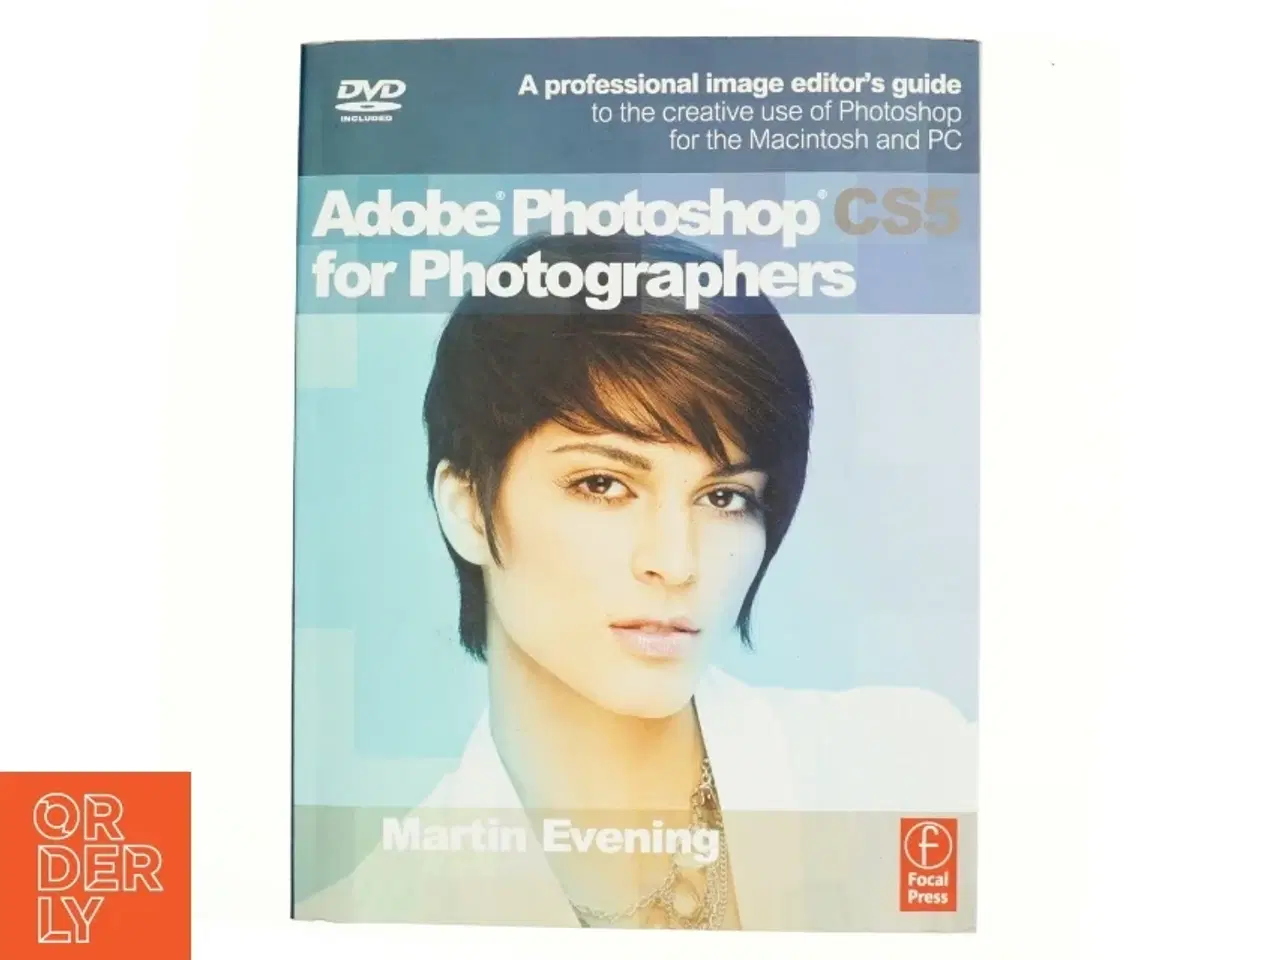 Billede 1 - Adobe Photoshop CS5 for photographers : a professional image editor's guide to the creative use of Photoshop for the Macintosh and pc af Martin Evenin